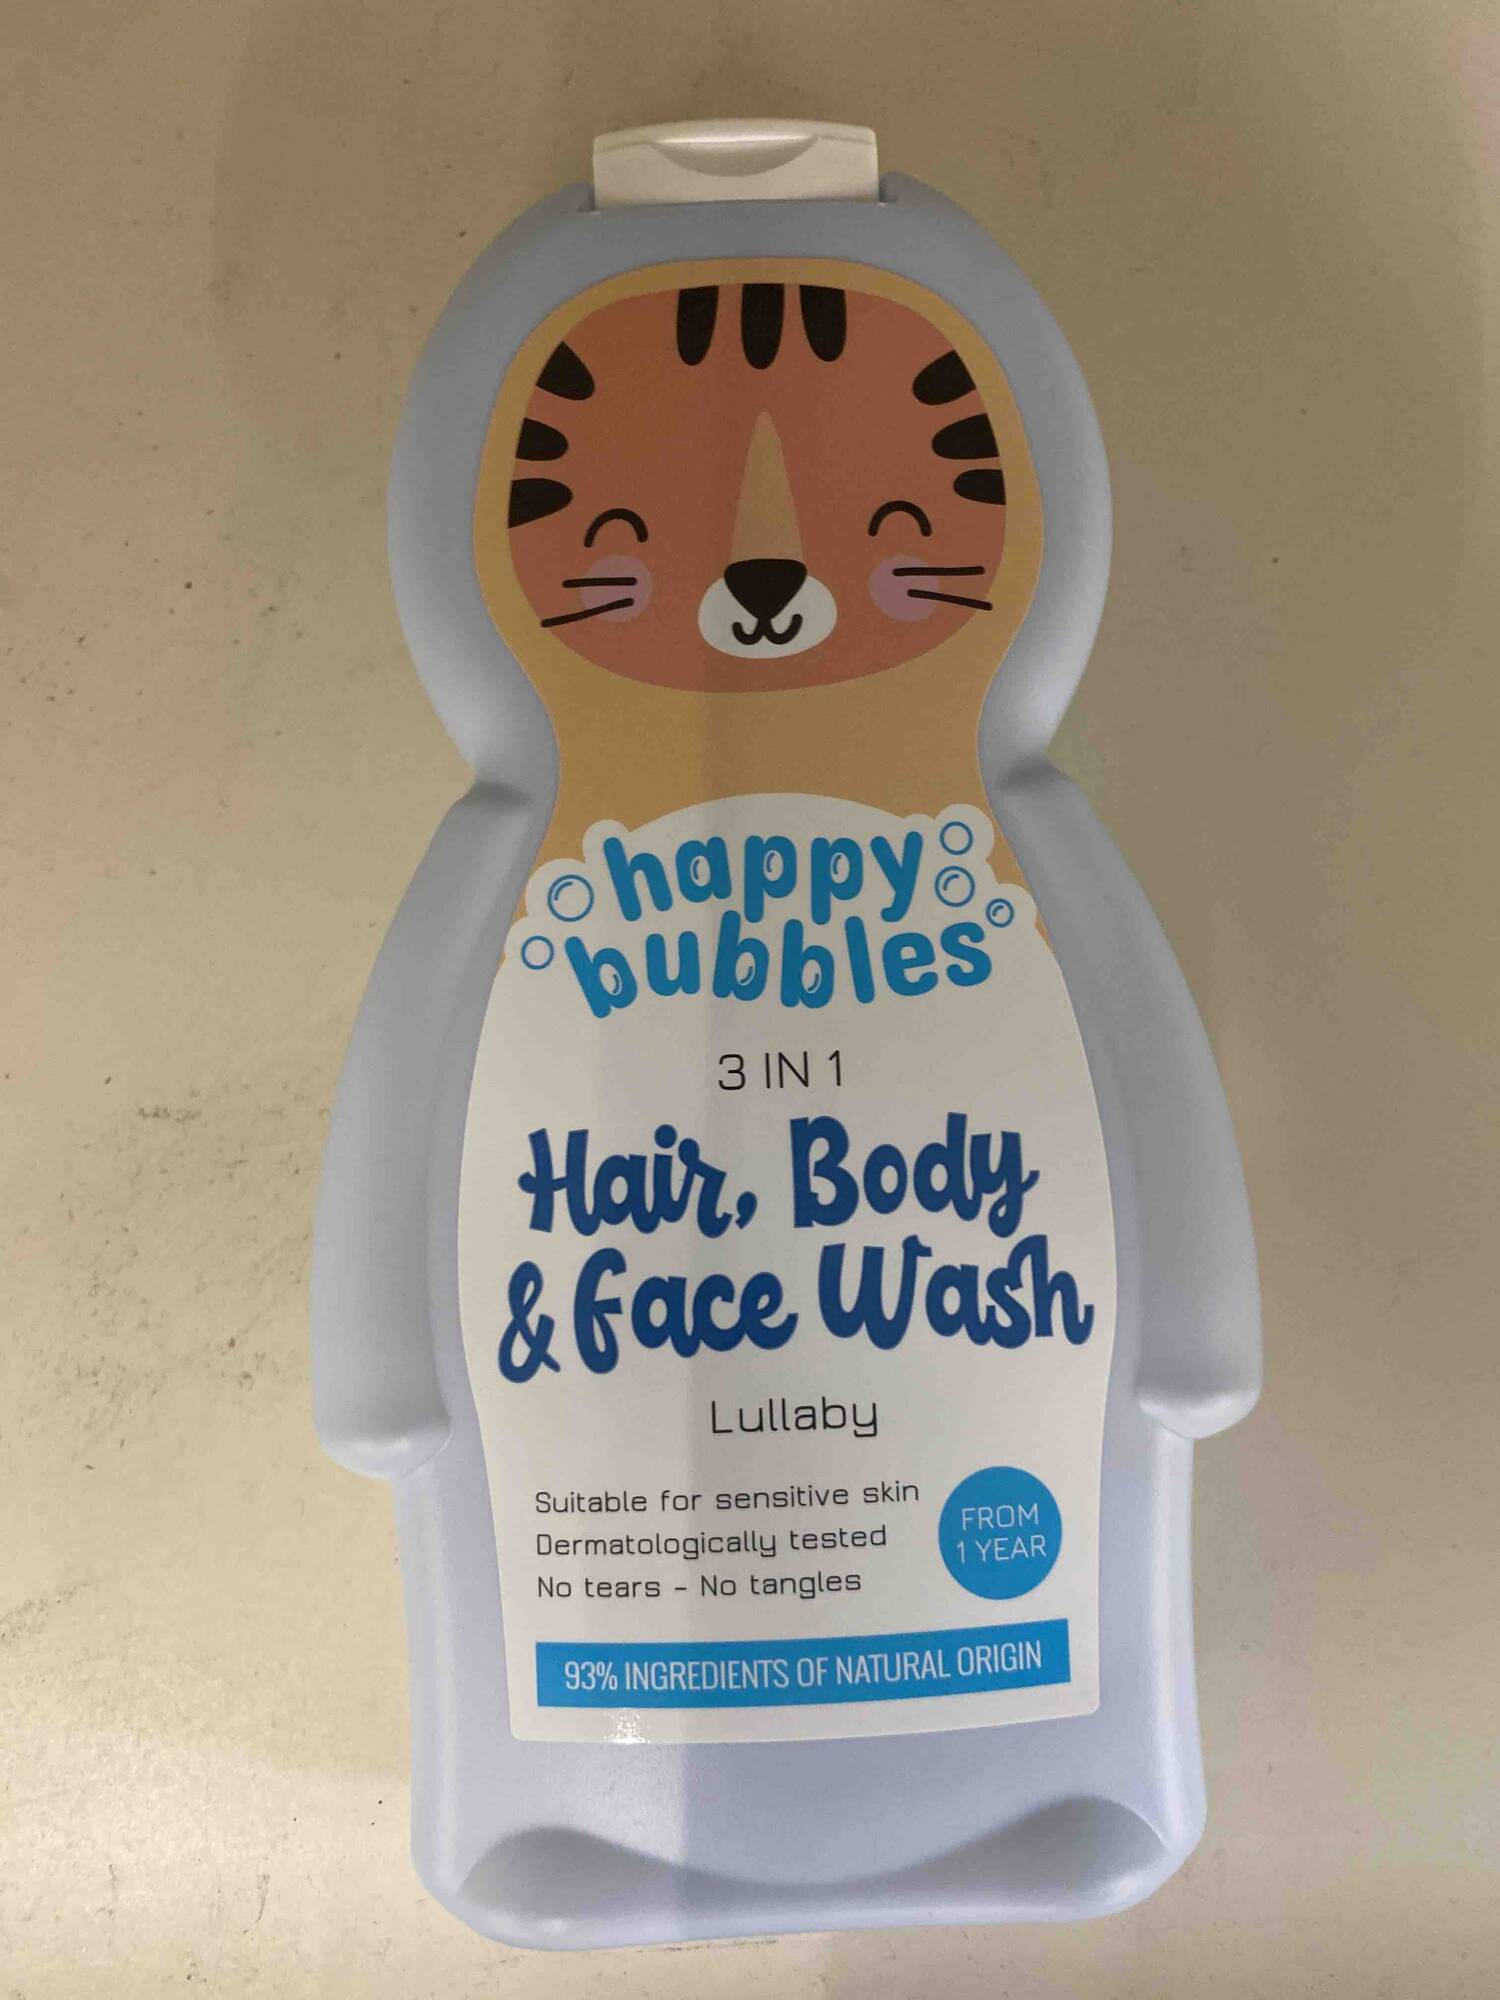 HAPPY BUBBLES - 3 in 1 Hair, body & face wash